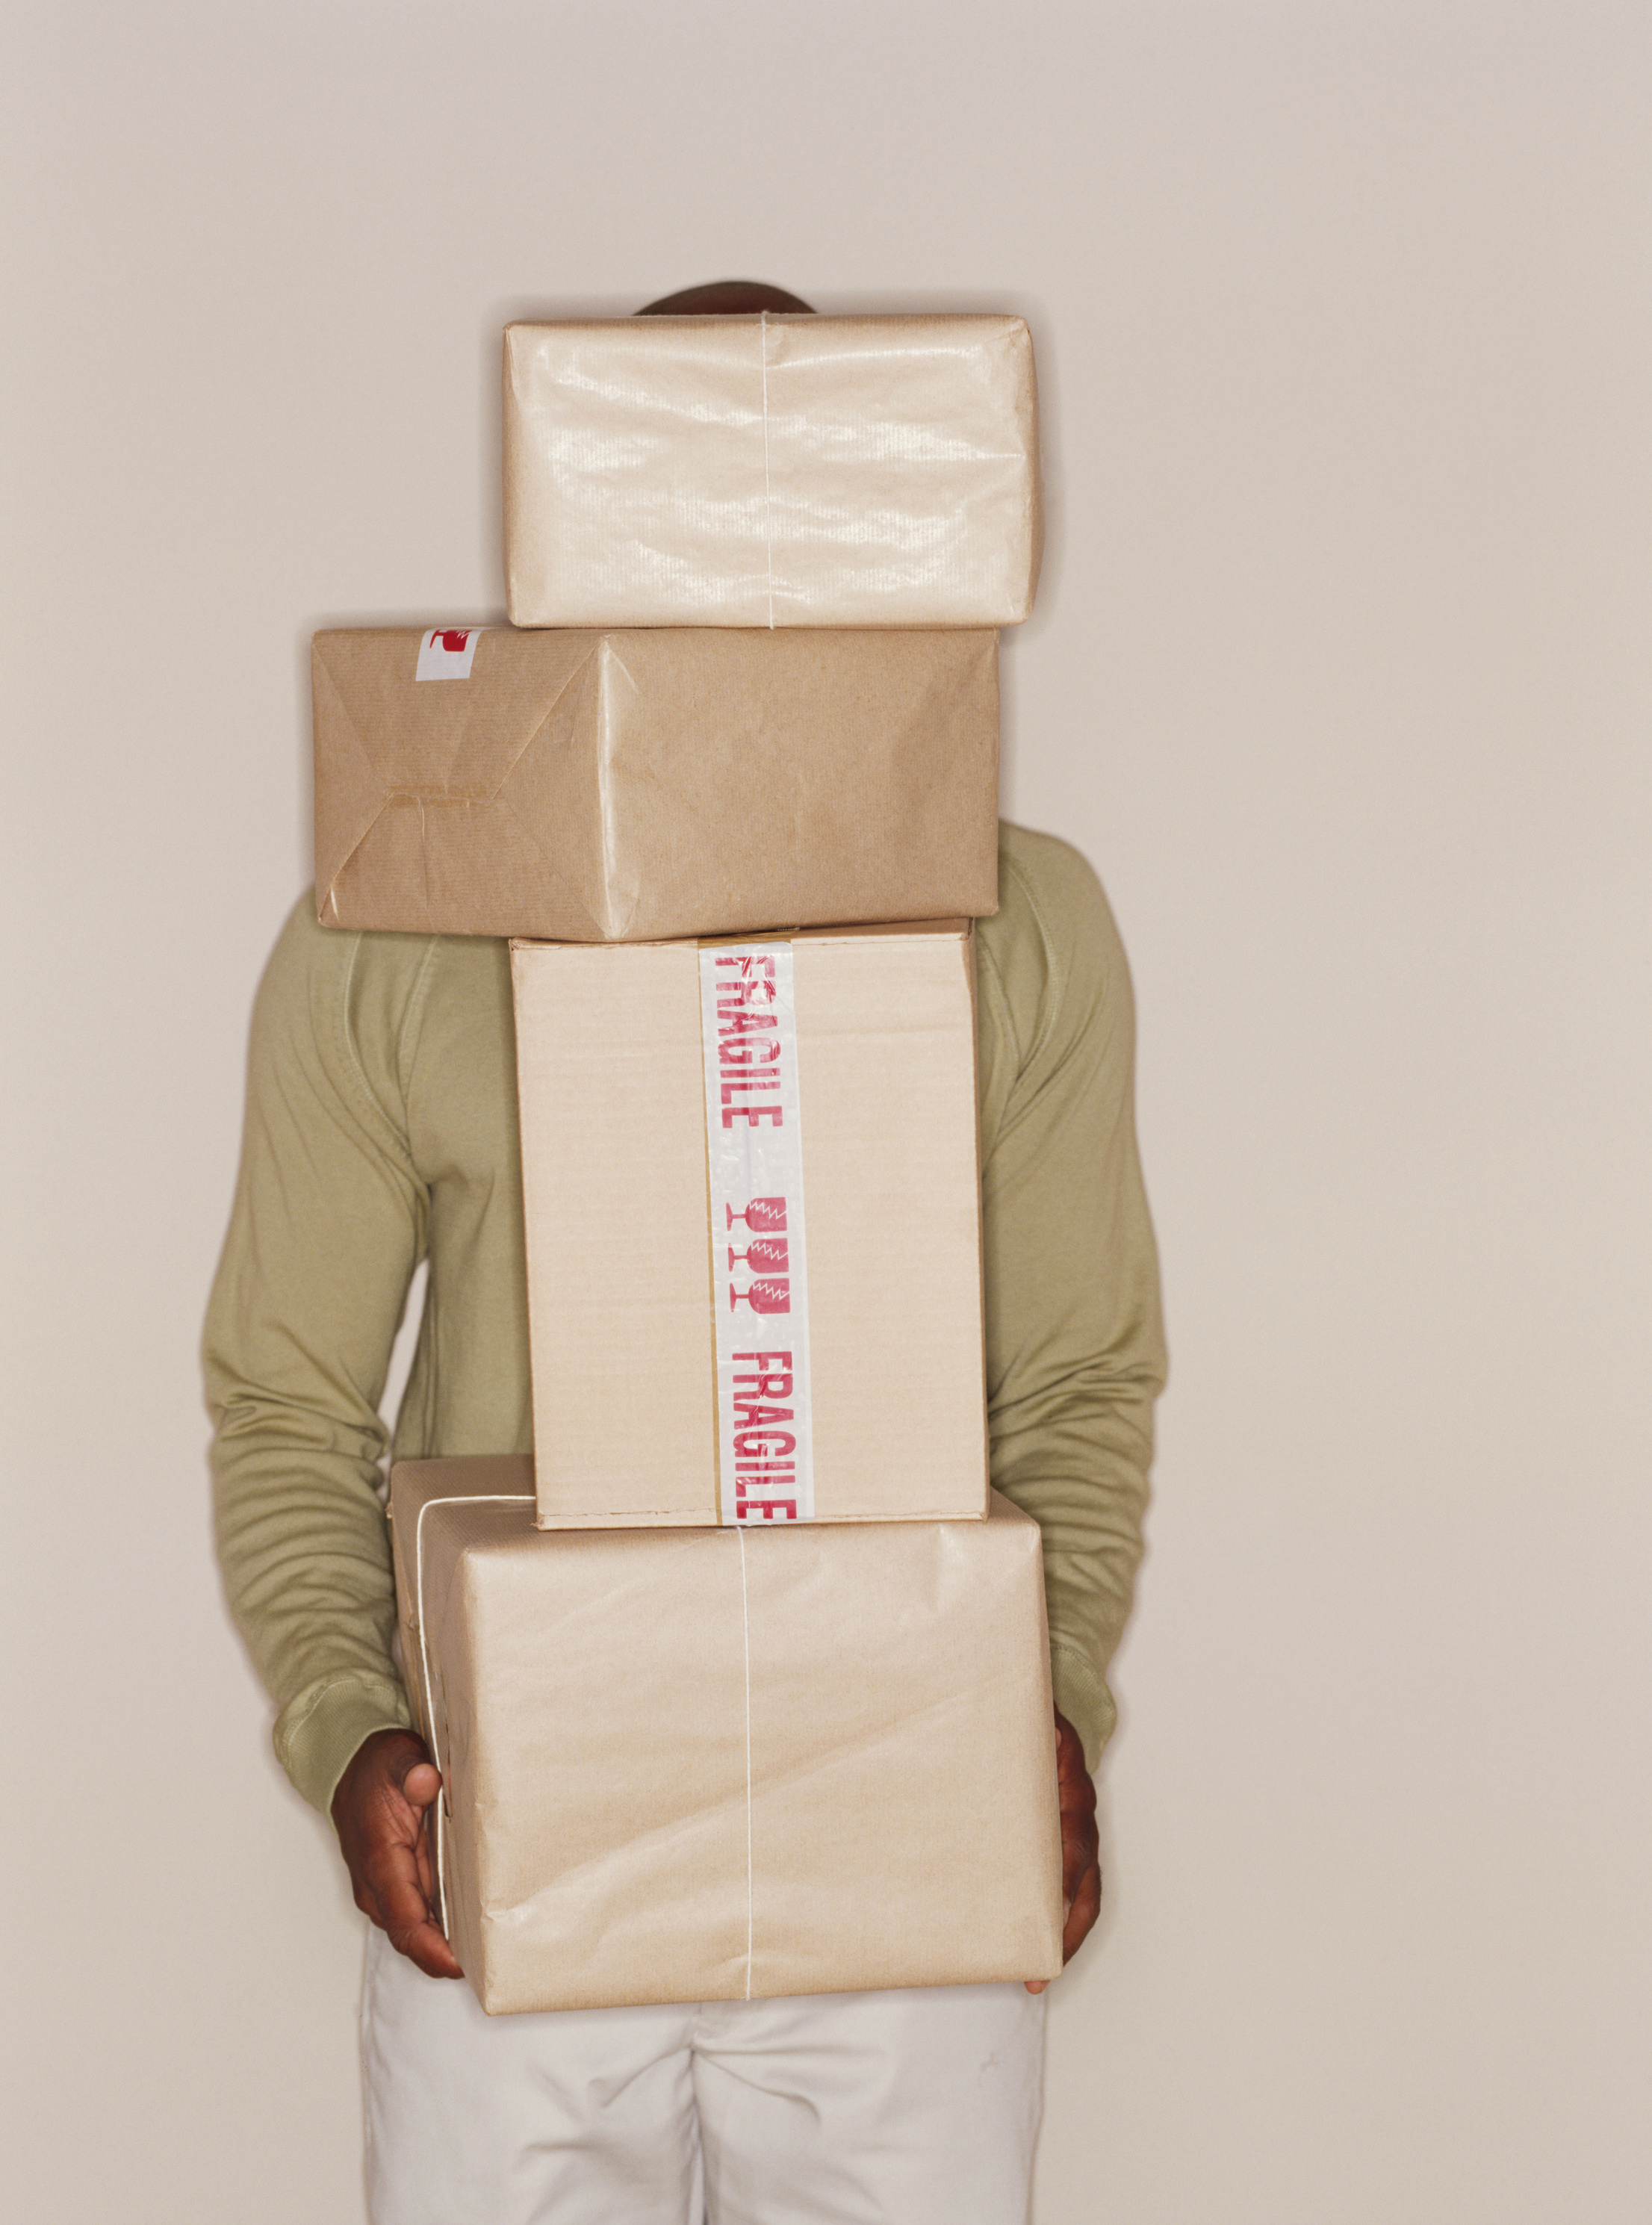 man holding packages